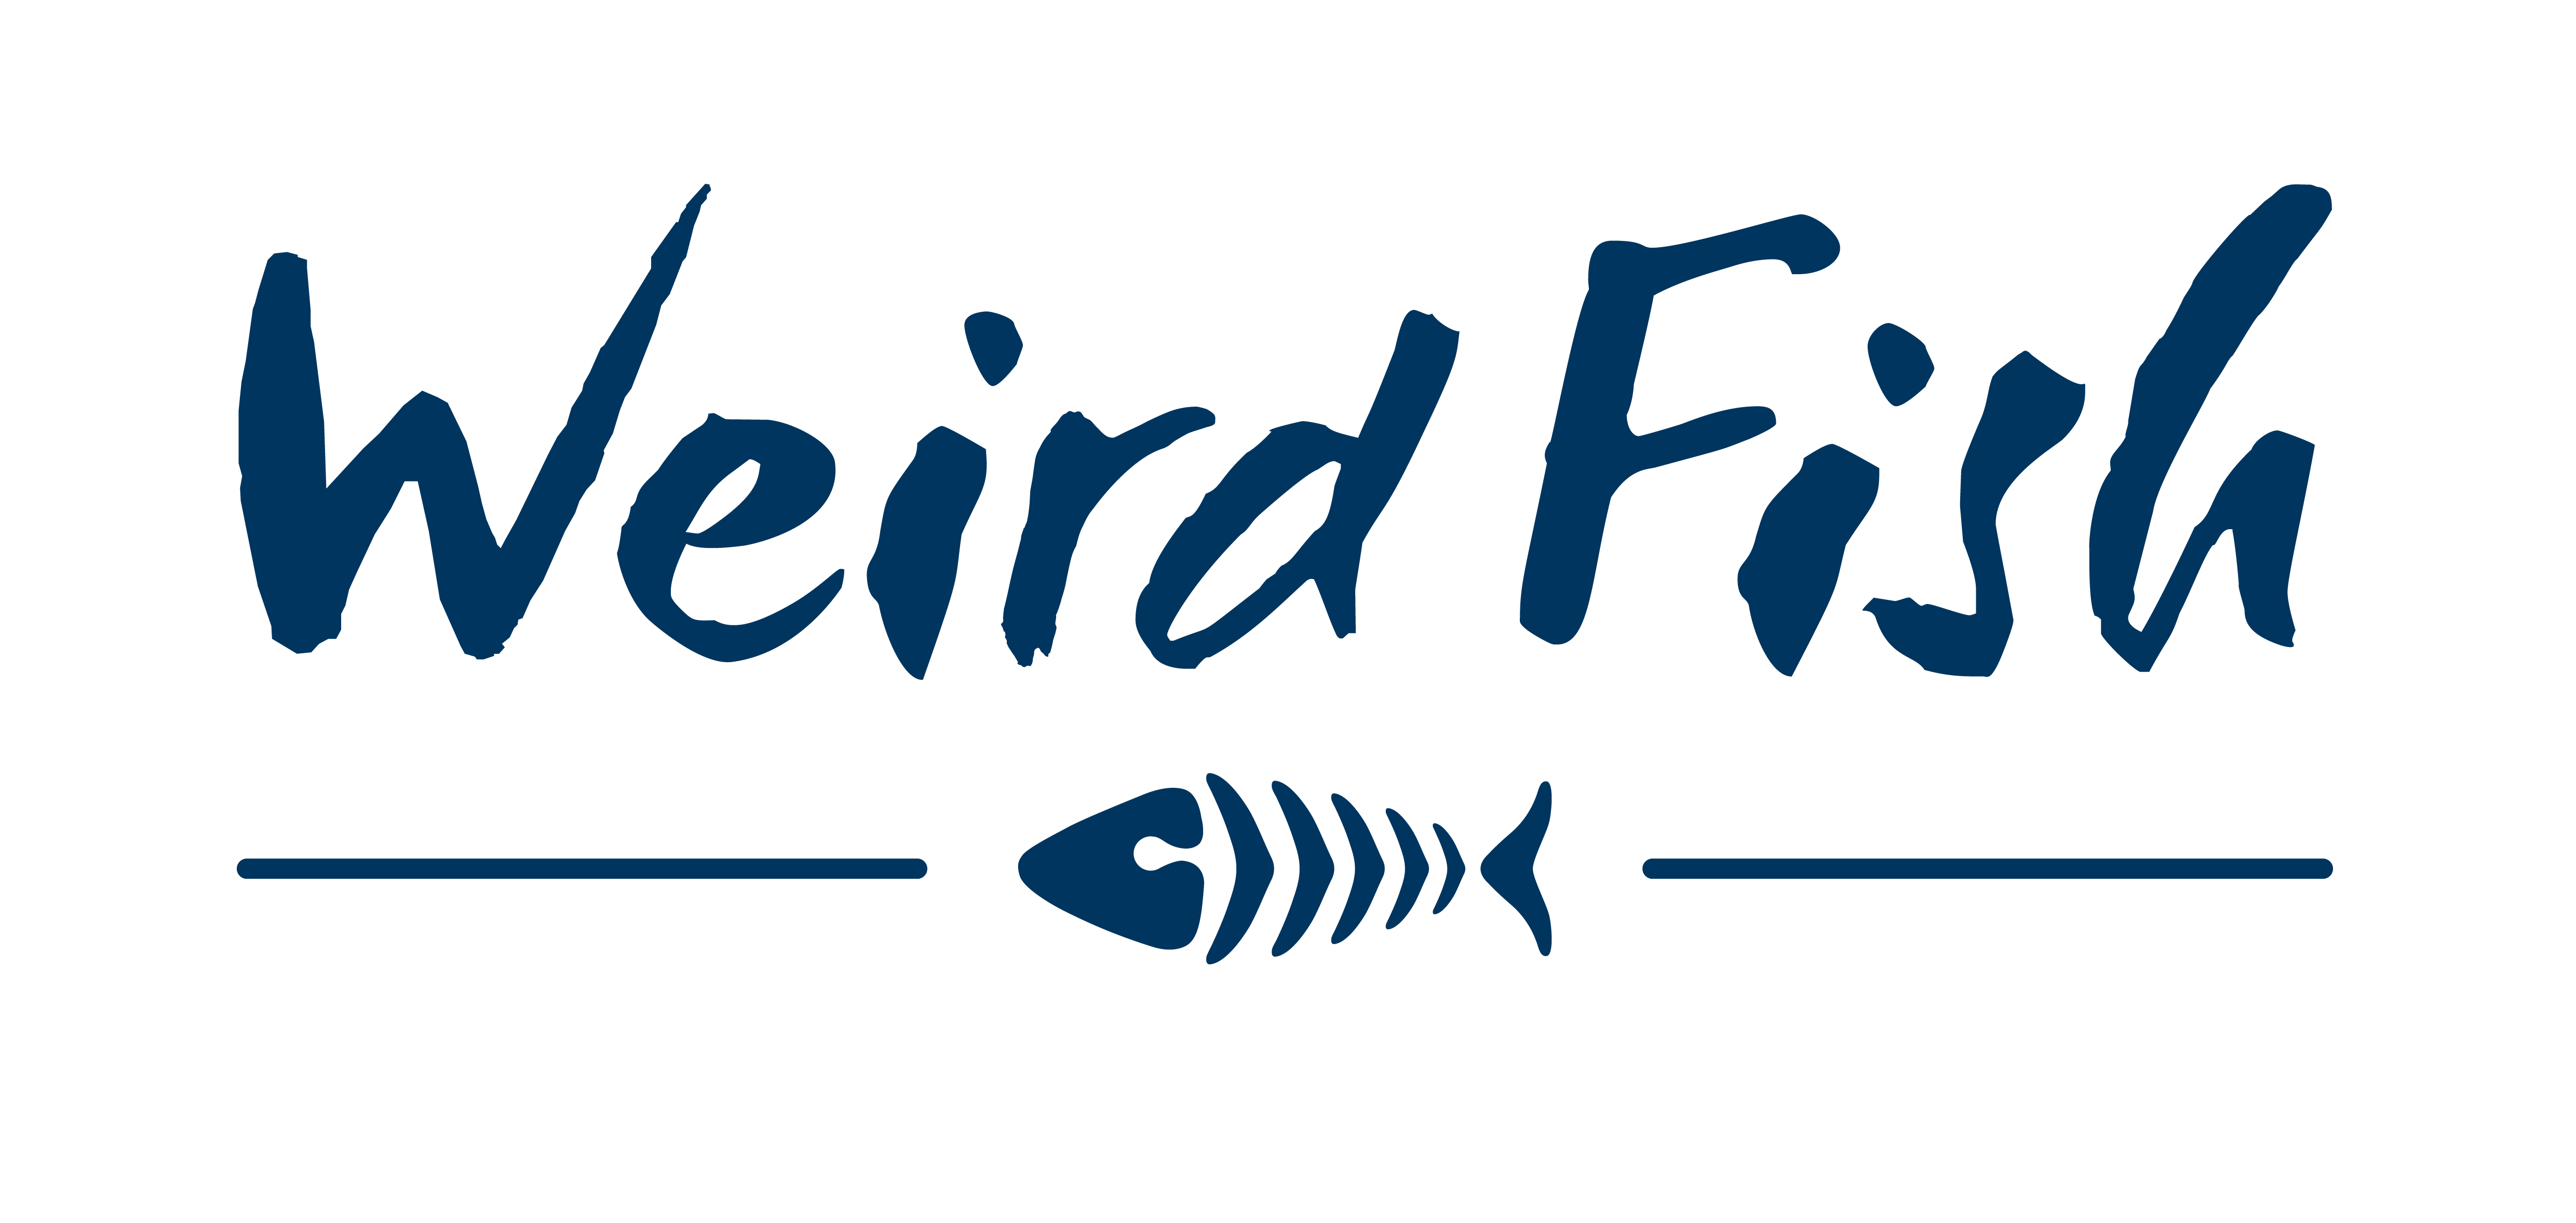 Weird Fish Coupons & Promo Codes